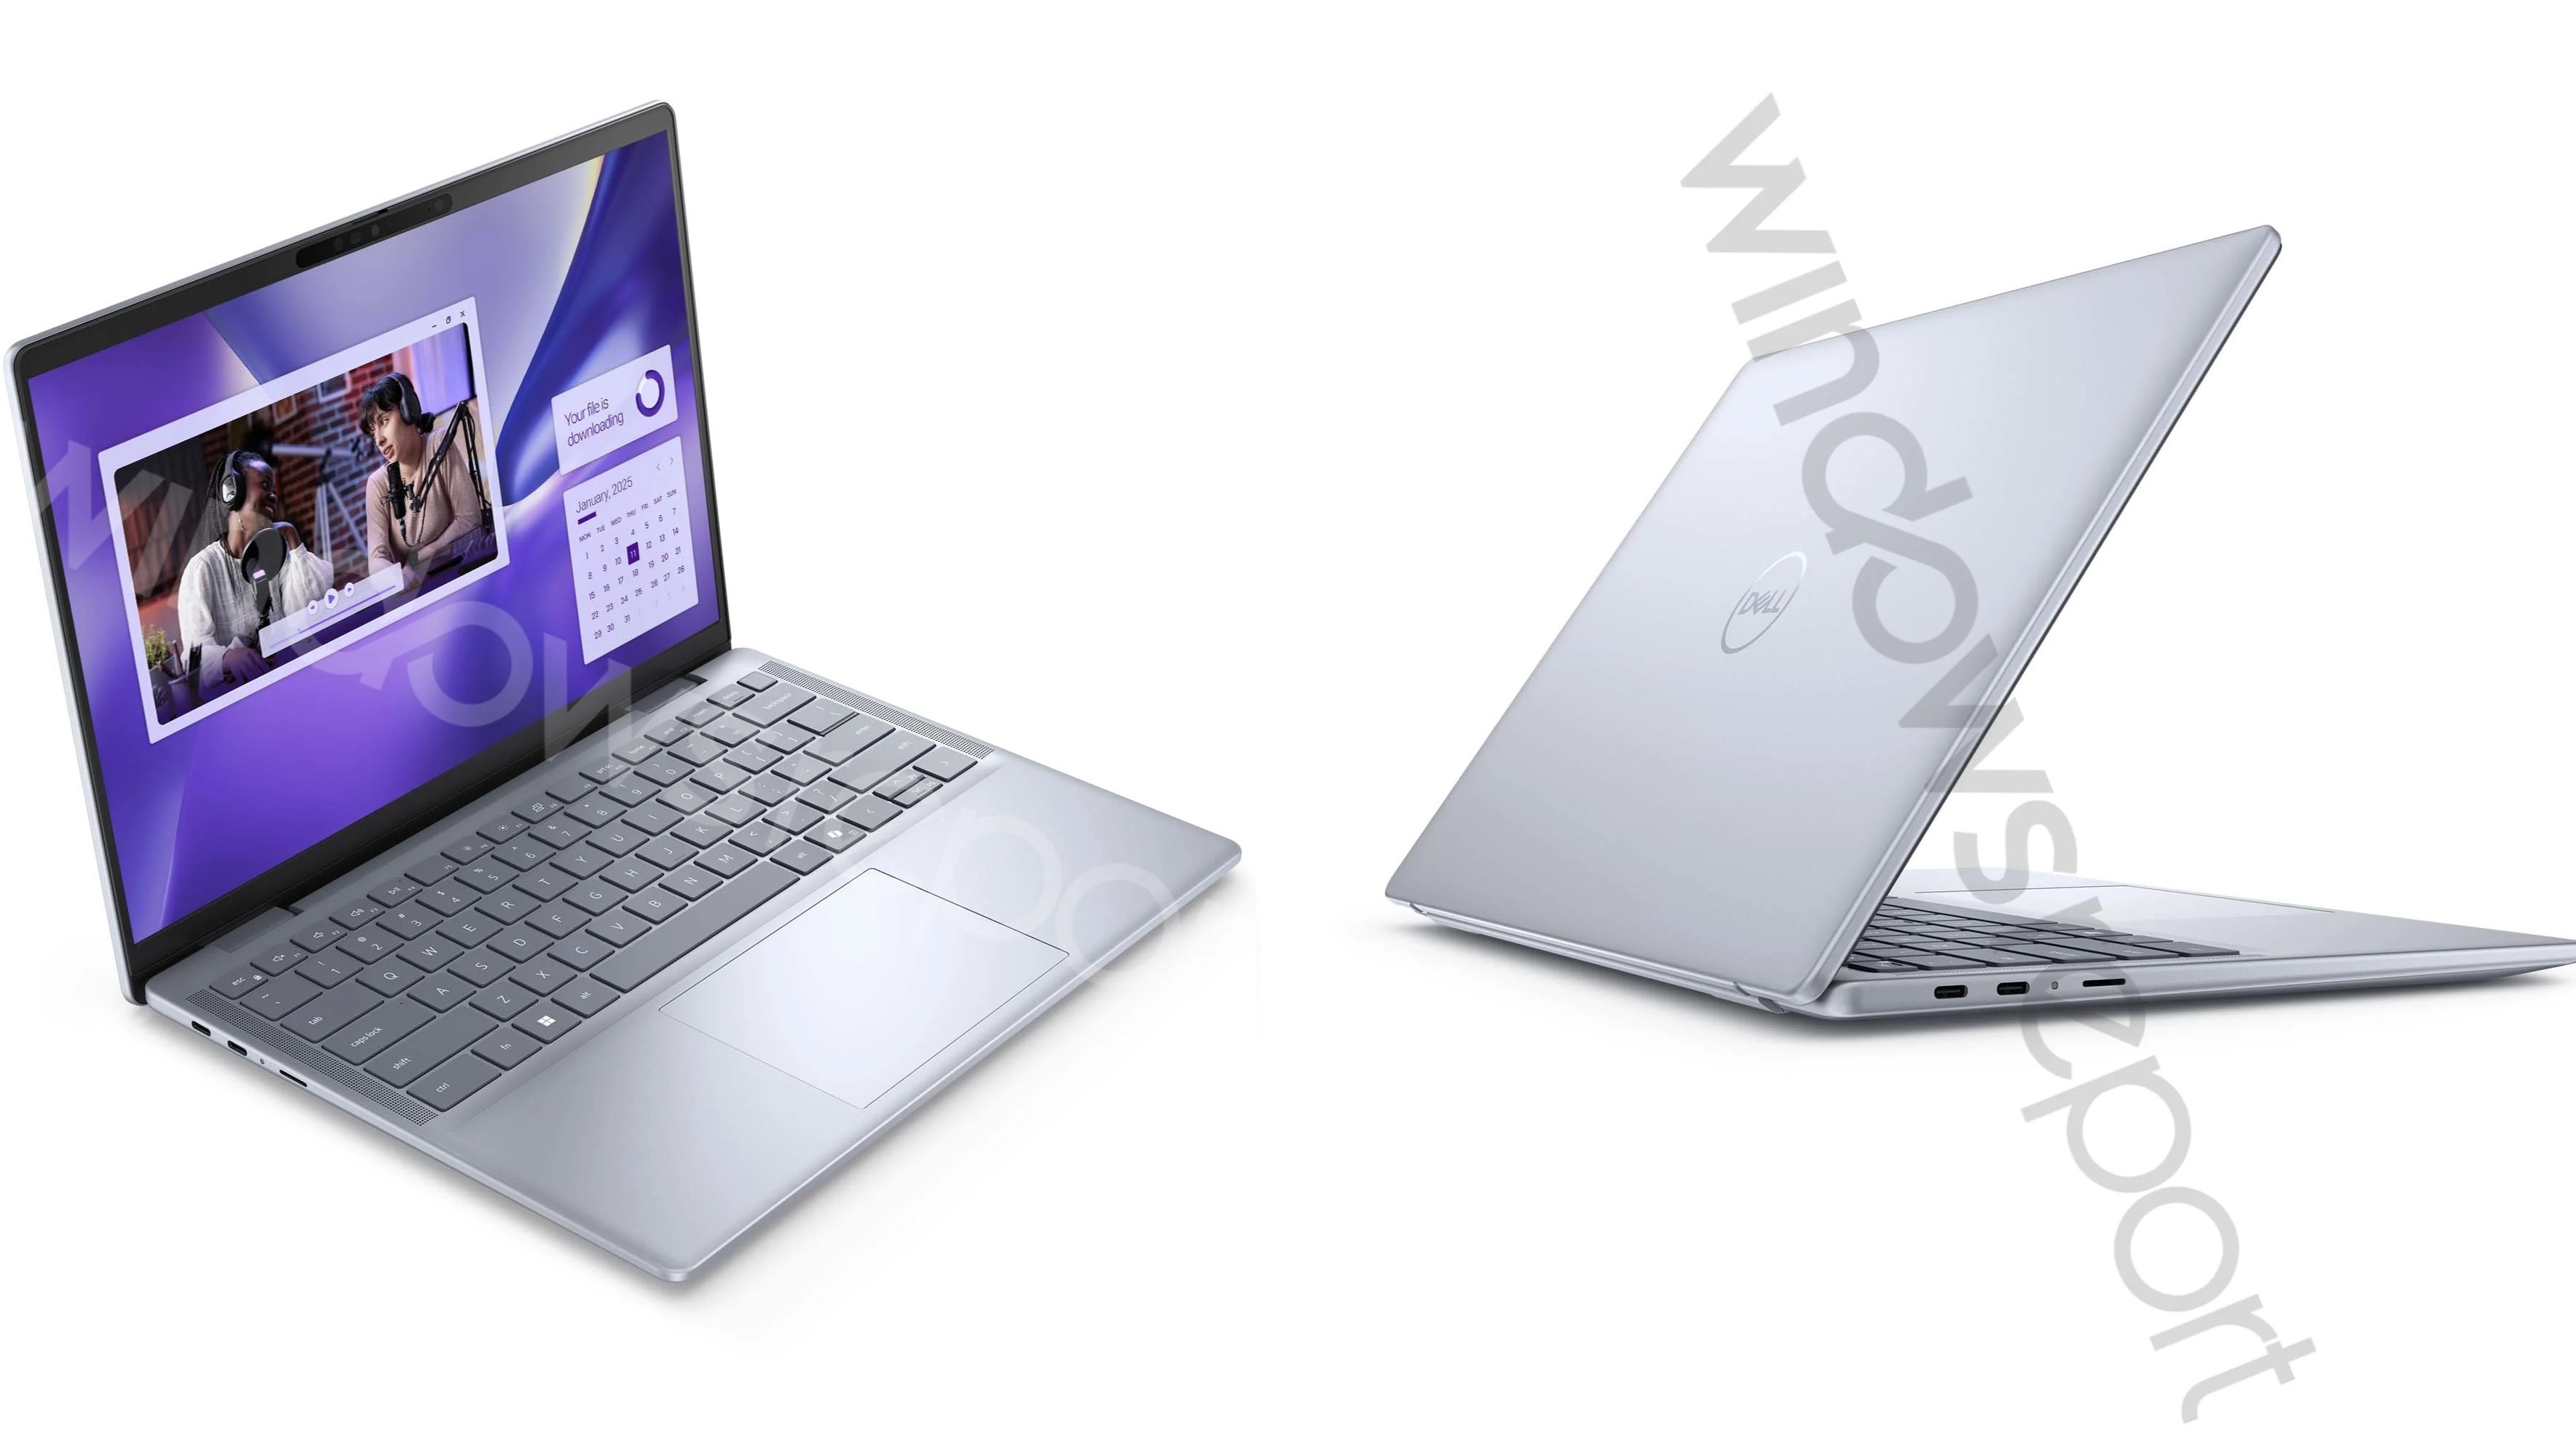 Dell's new Arm laptops